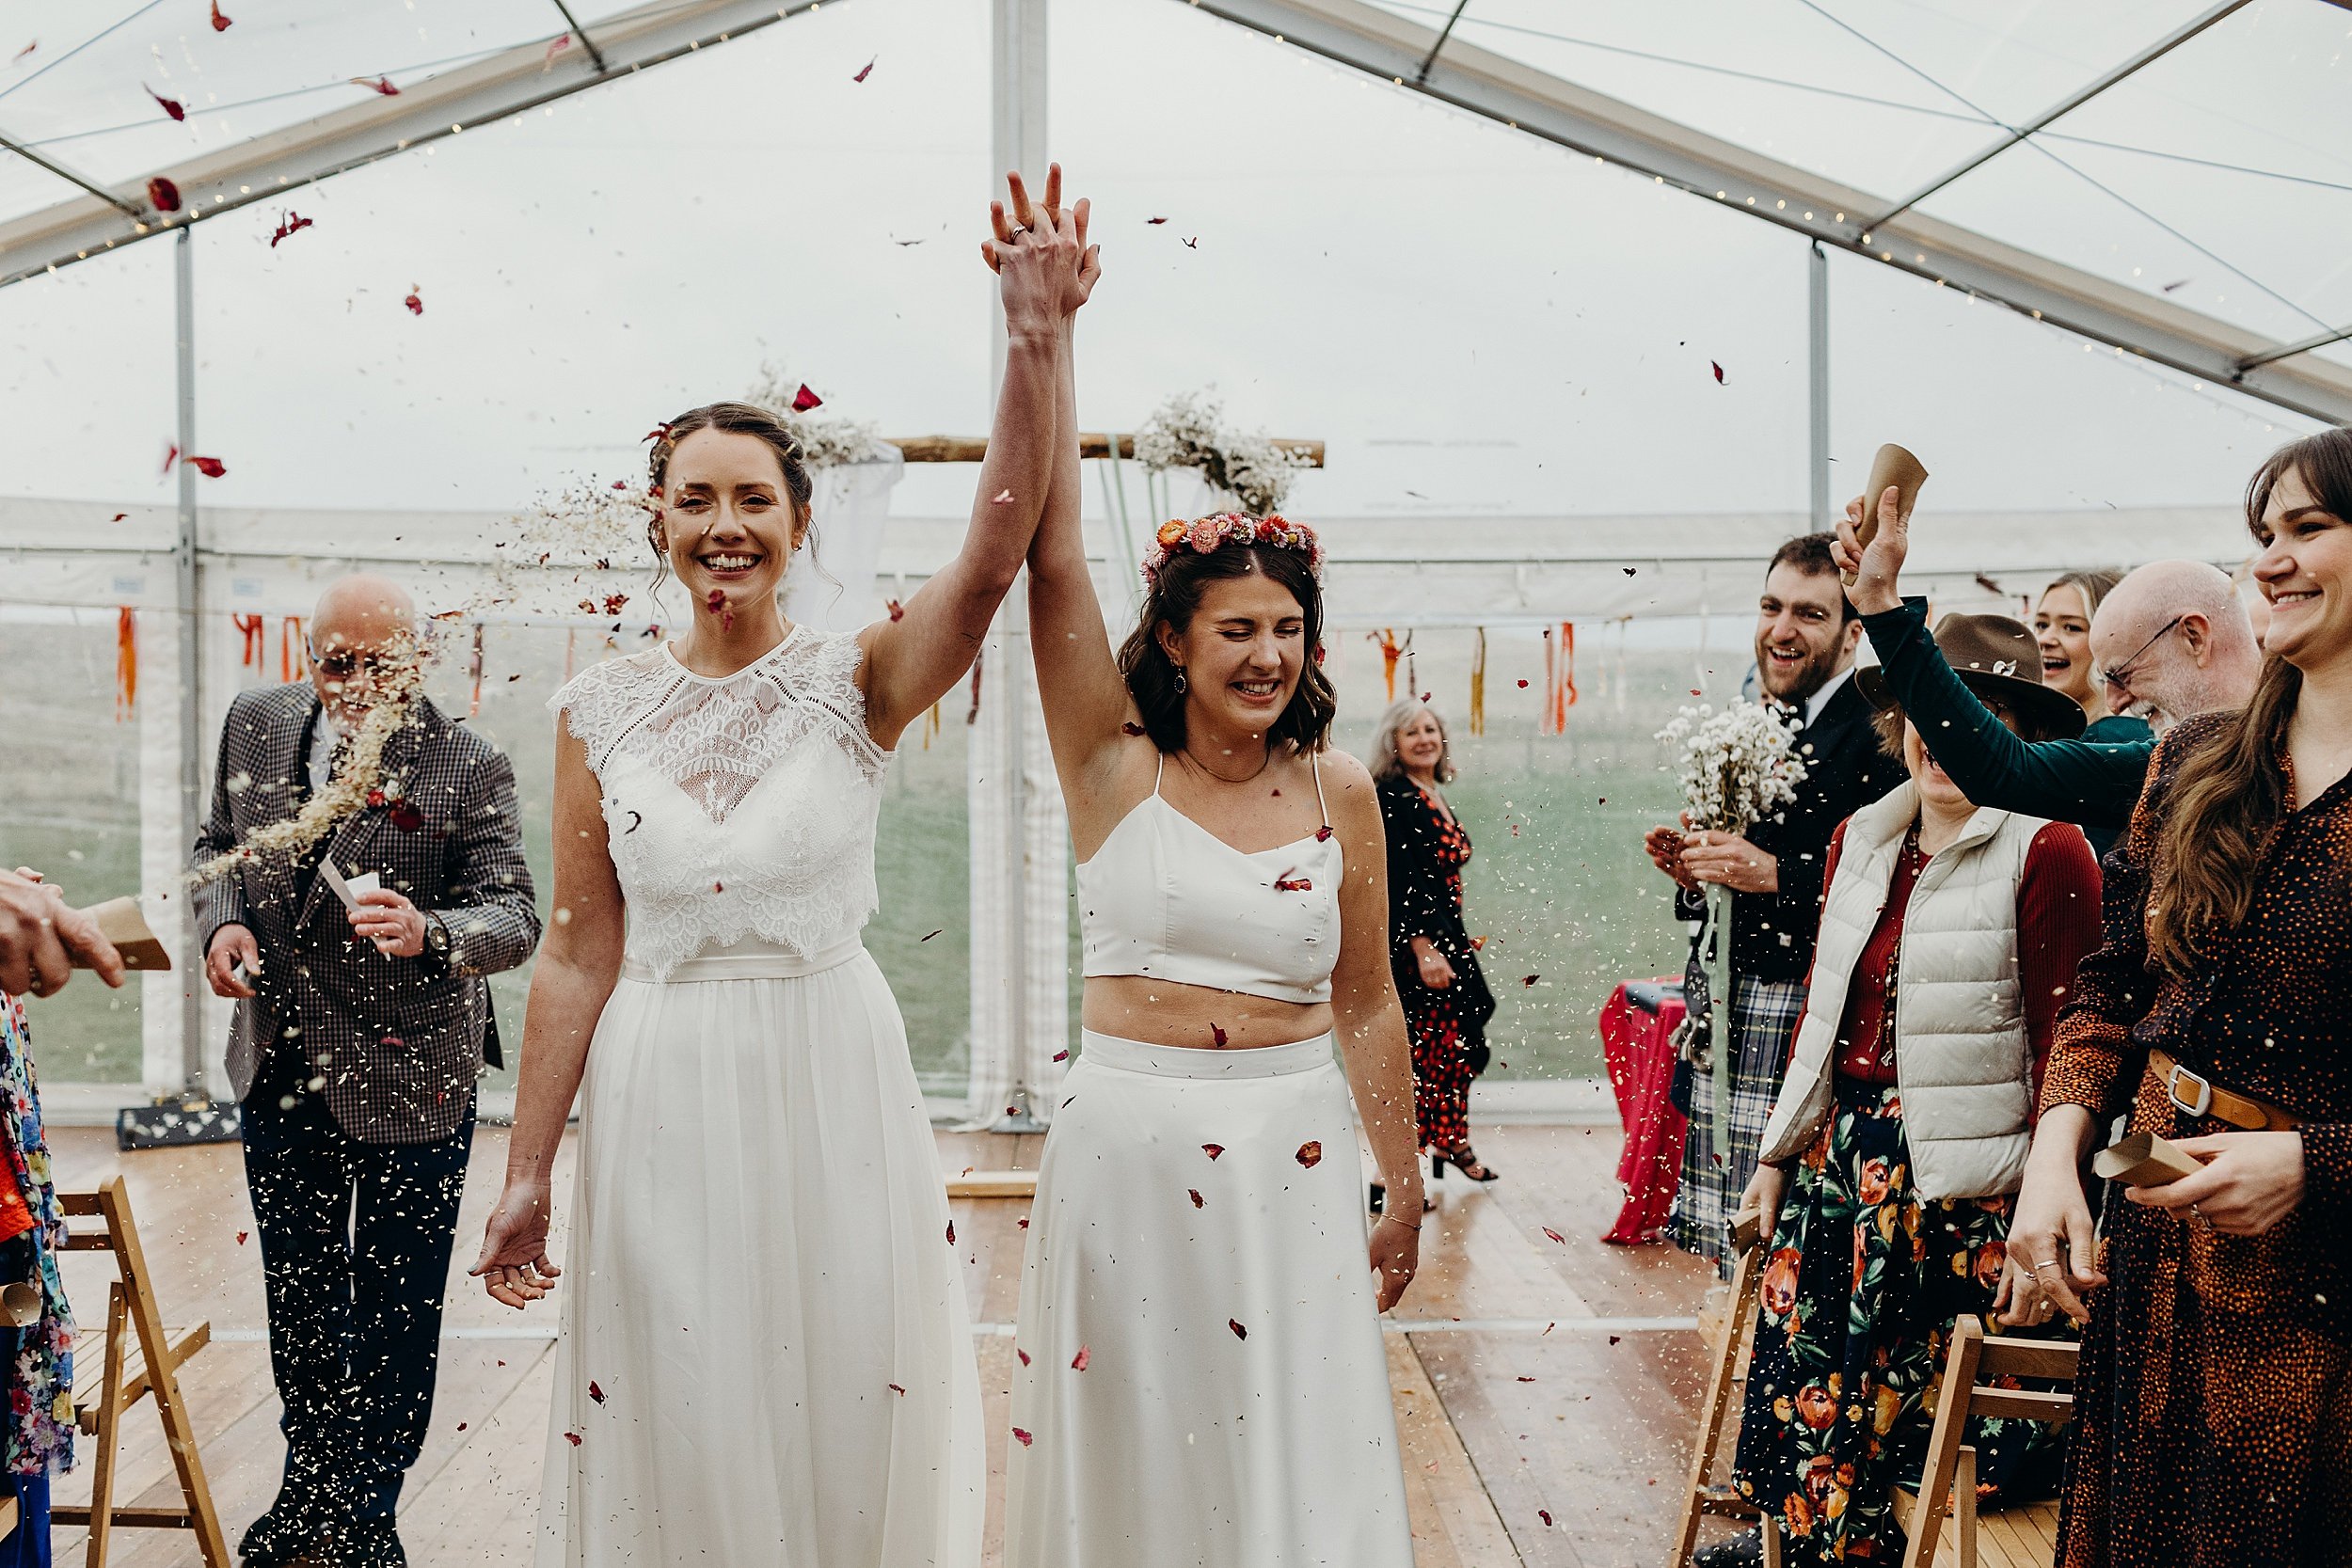 inside a white marquee guests throw confetti as the two brides walk down the aisle following their harvest moon wedding in dunbar east lothian scotland